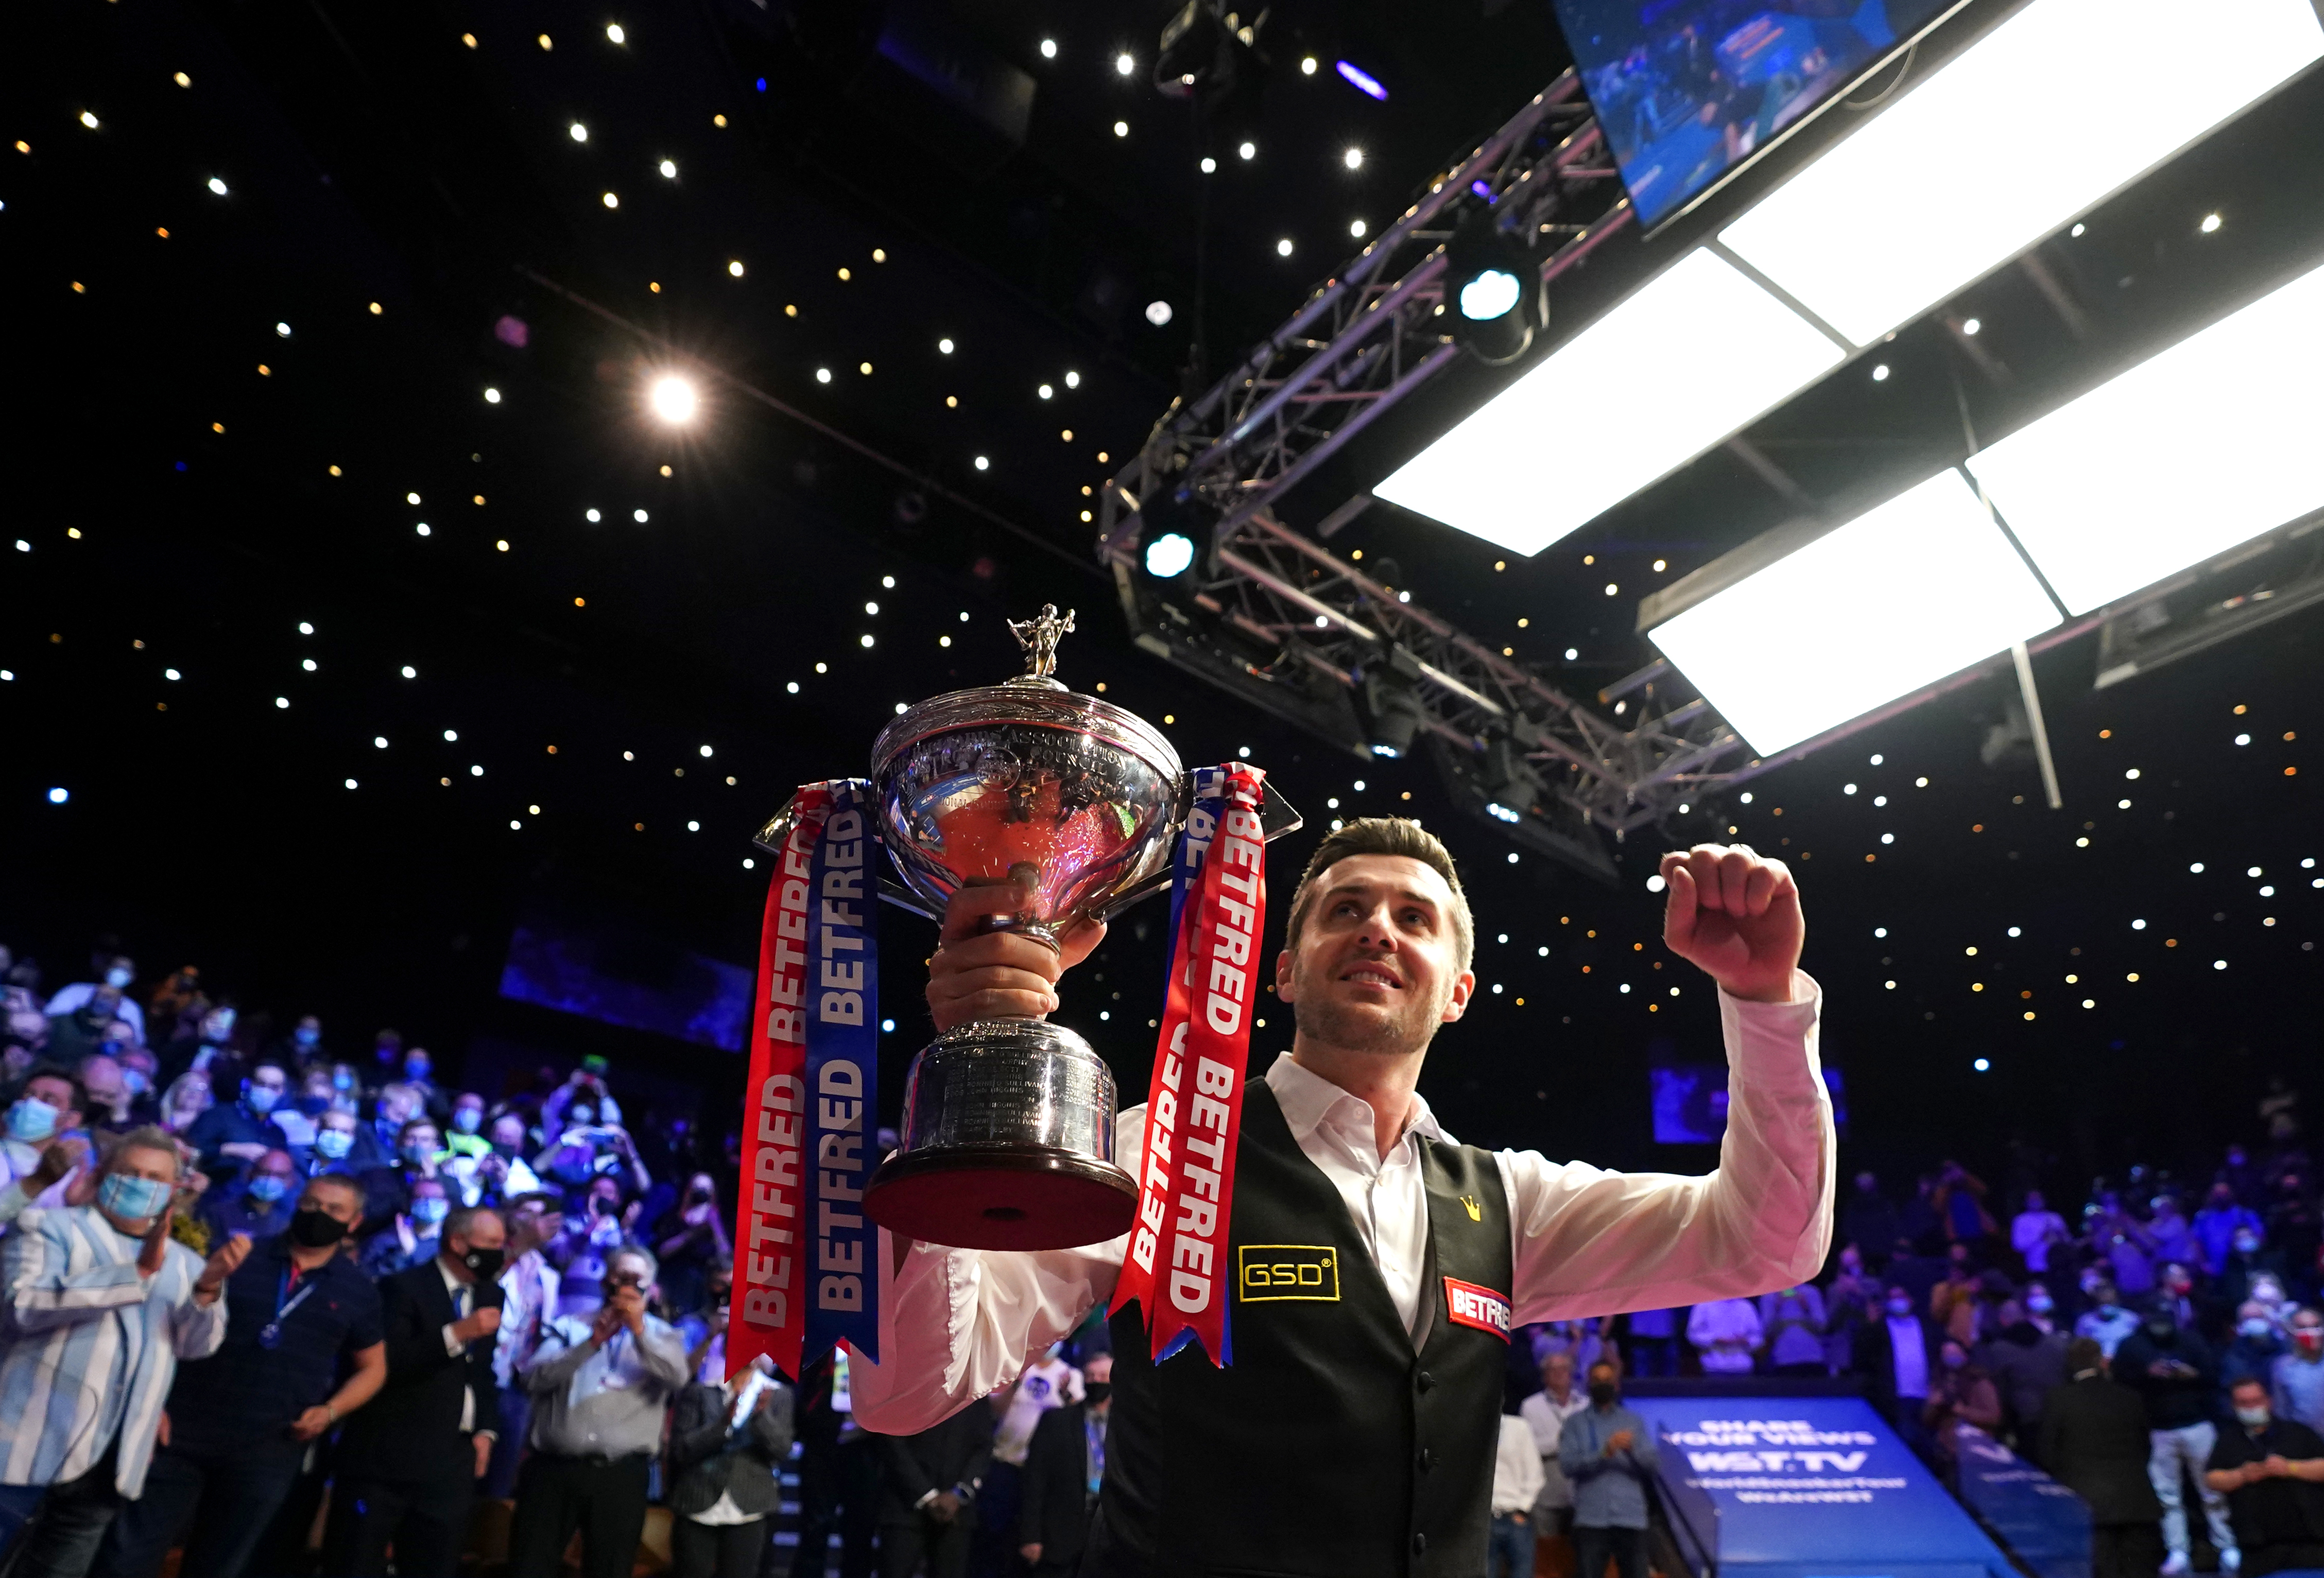 Jester from Leicester wins fourth World Snooker Championship title ITV News Central